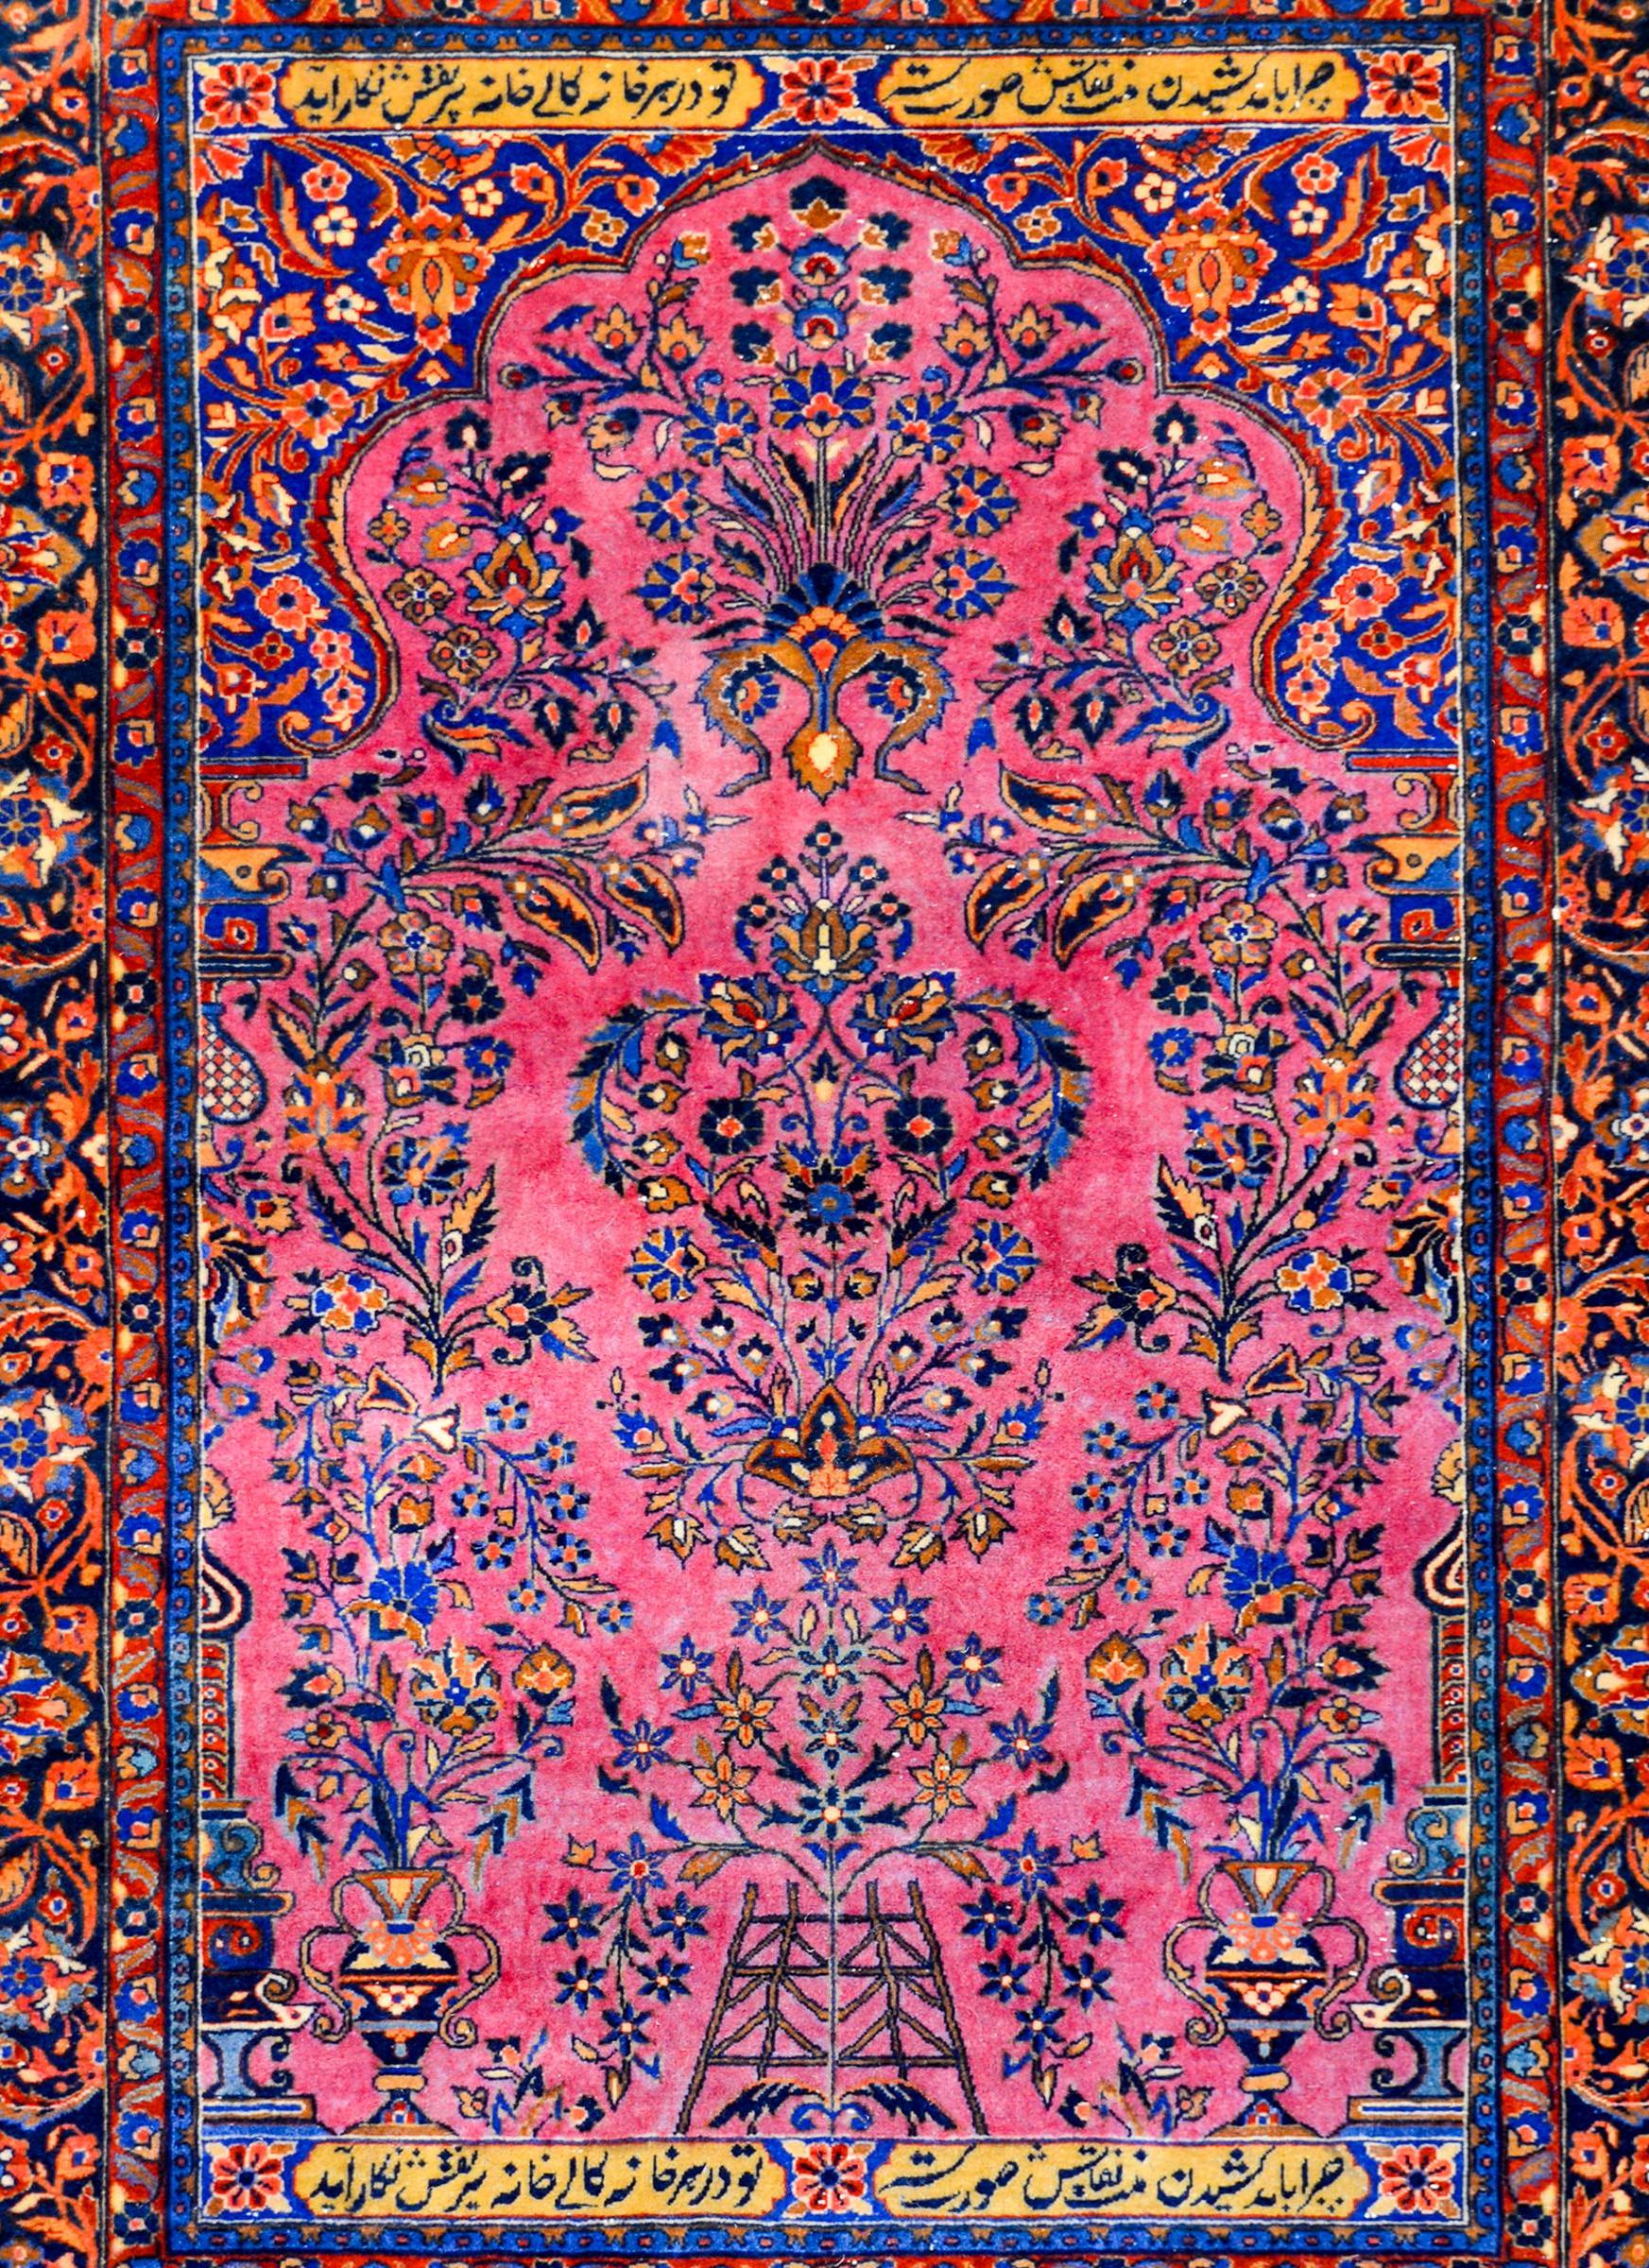 A wonderful early 20th century Persian Kashan prayer rug with a central tree-of-life pattern woven in light and dark indigo, orange, crimson, and gold vegetable dyed wool on a light cranberry colored field. The border is wide with a large-scale